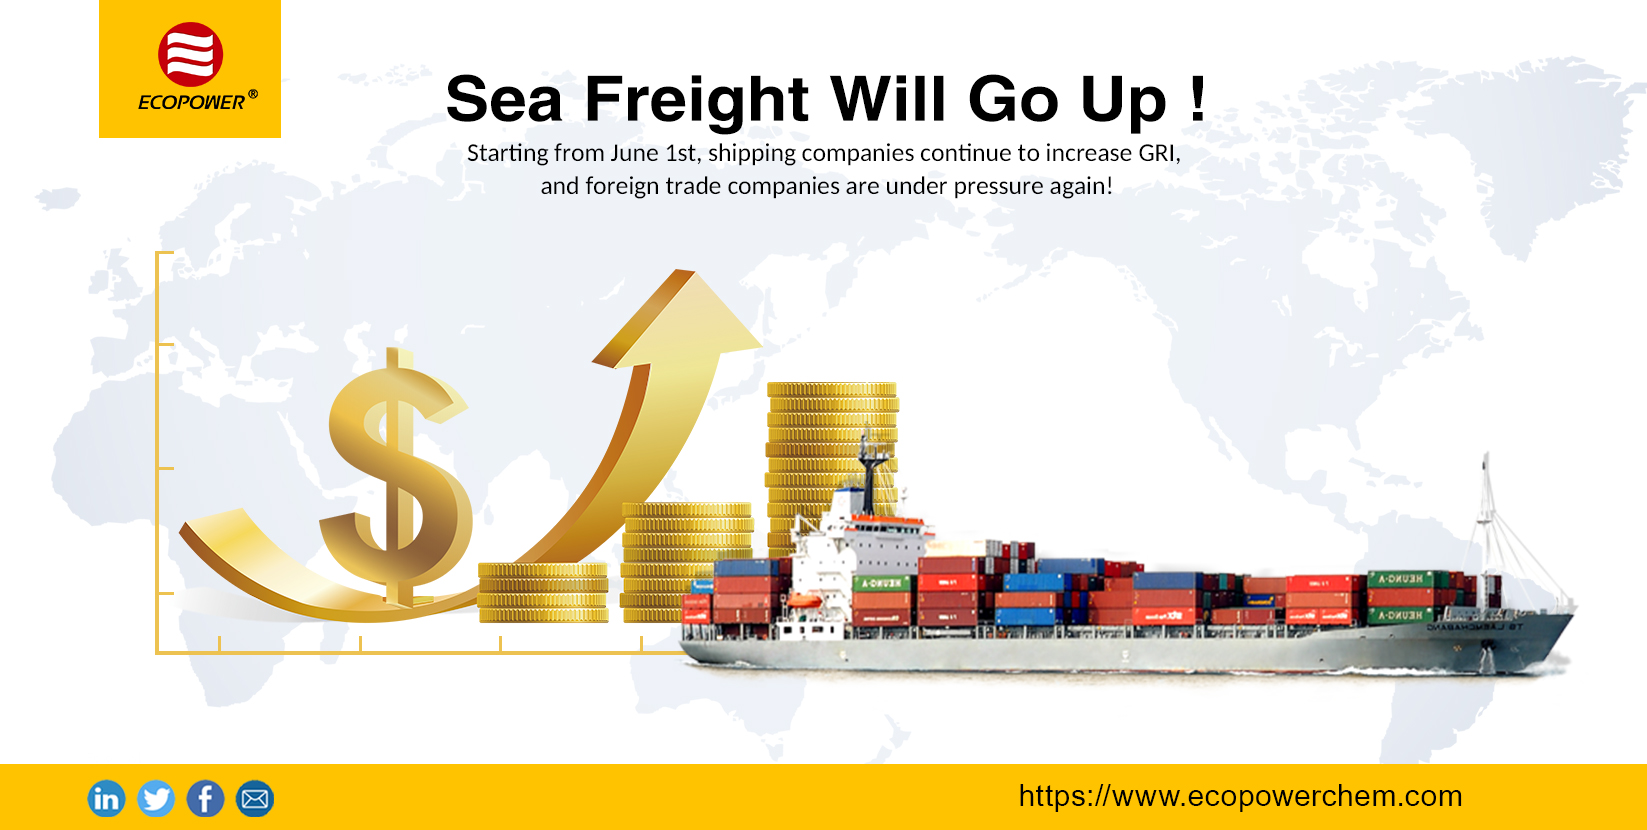 ECOPOWER Sea Freight Will Go Up!